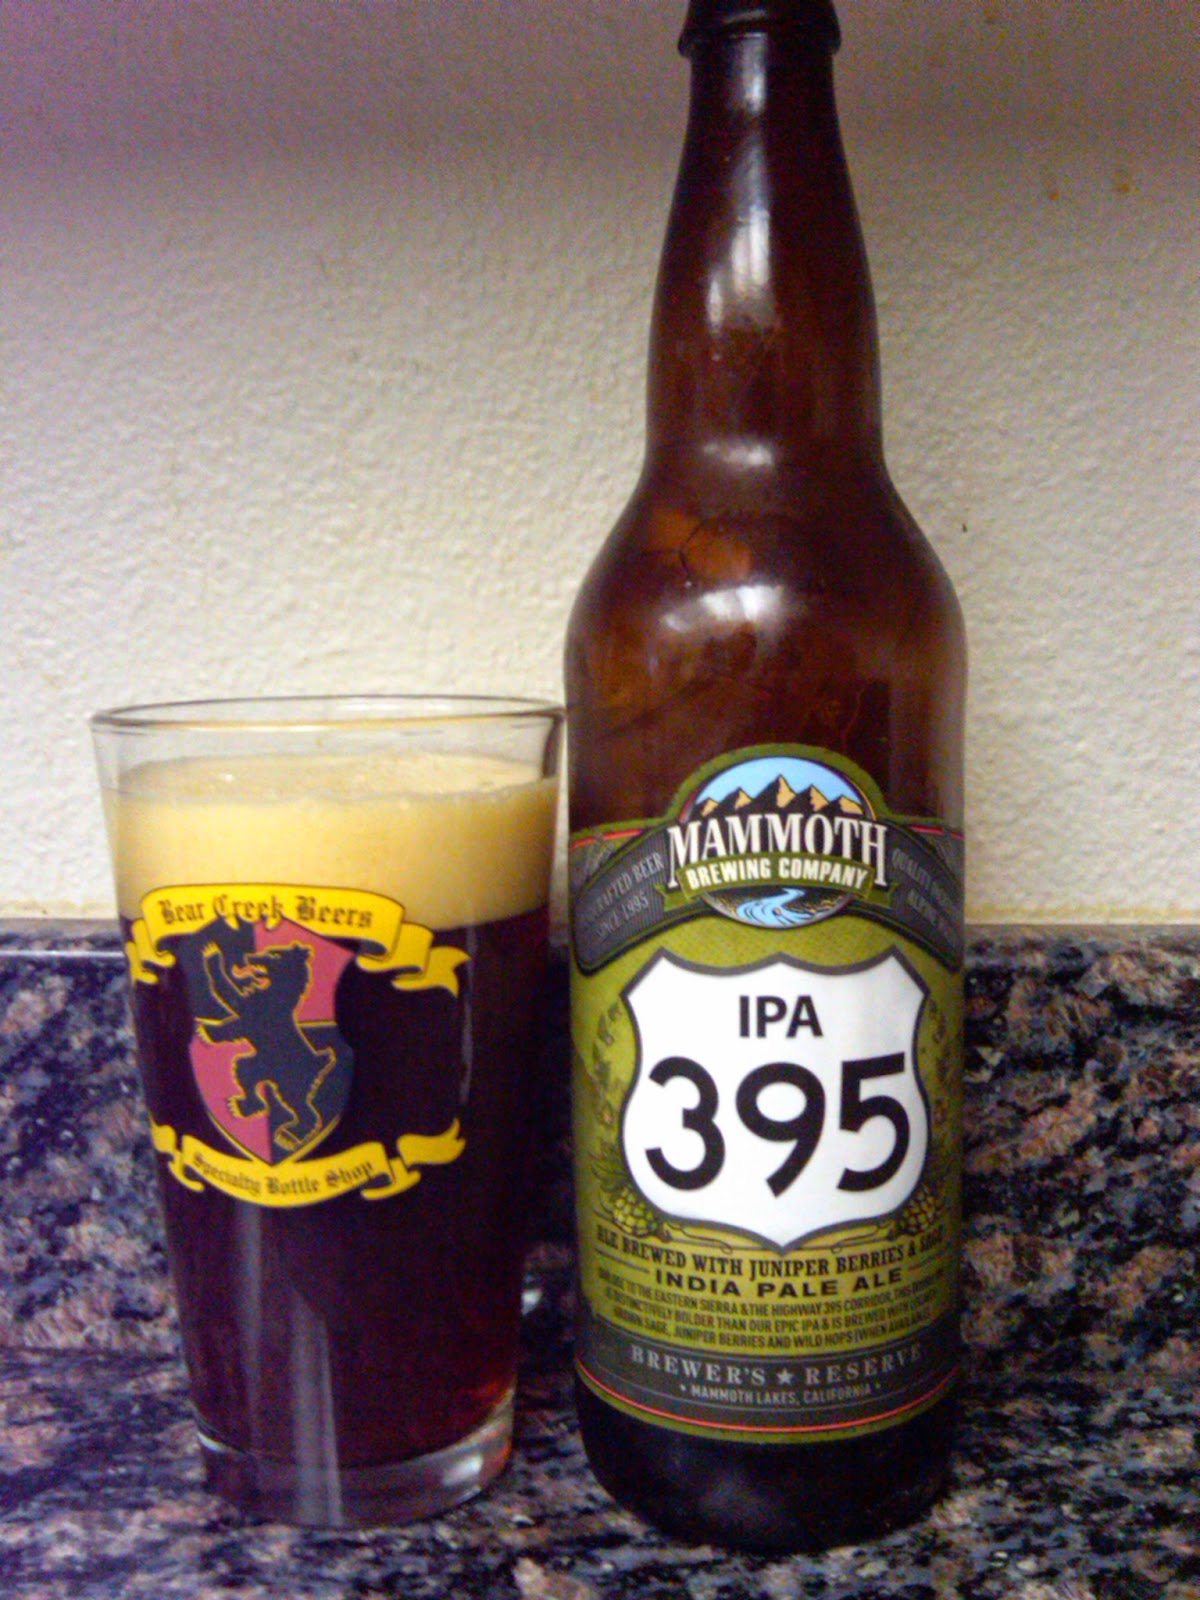 [JEU] Chiffres en images. - Page 17 Mammoth+Brewing+IPA+395+Double